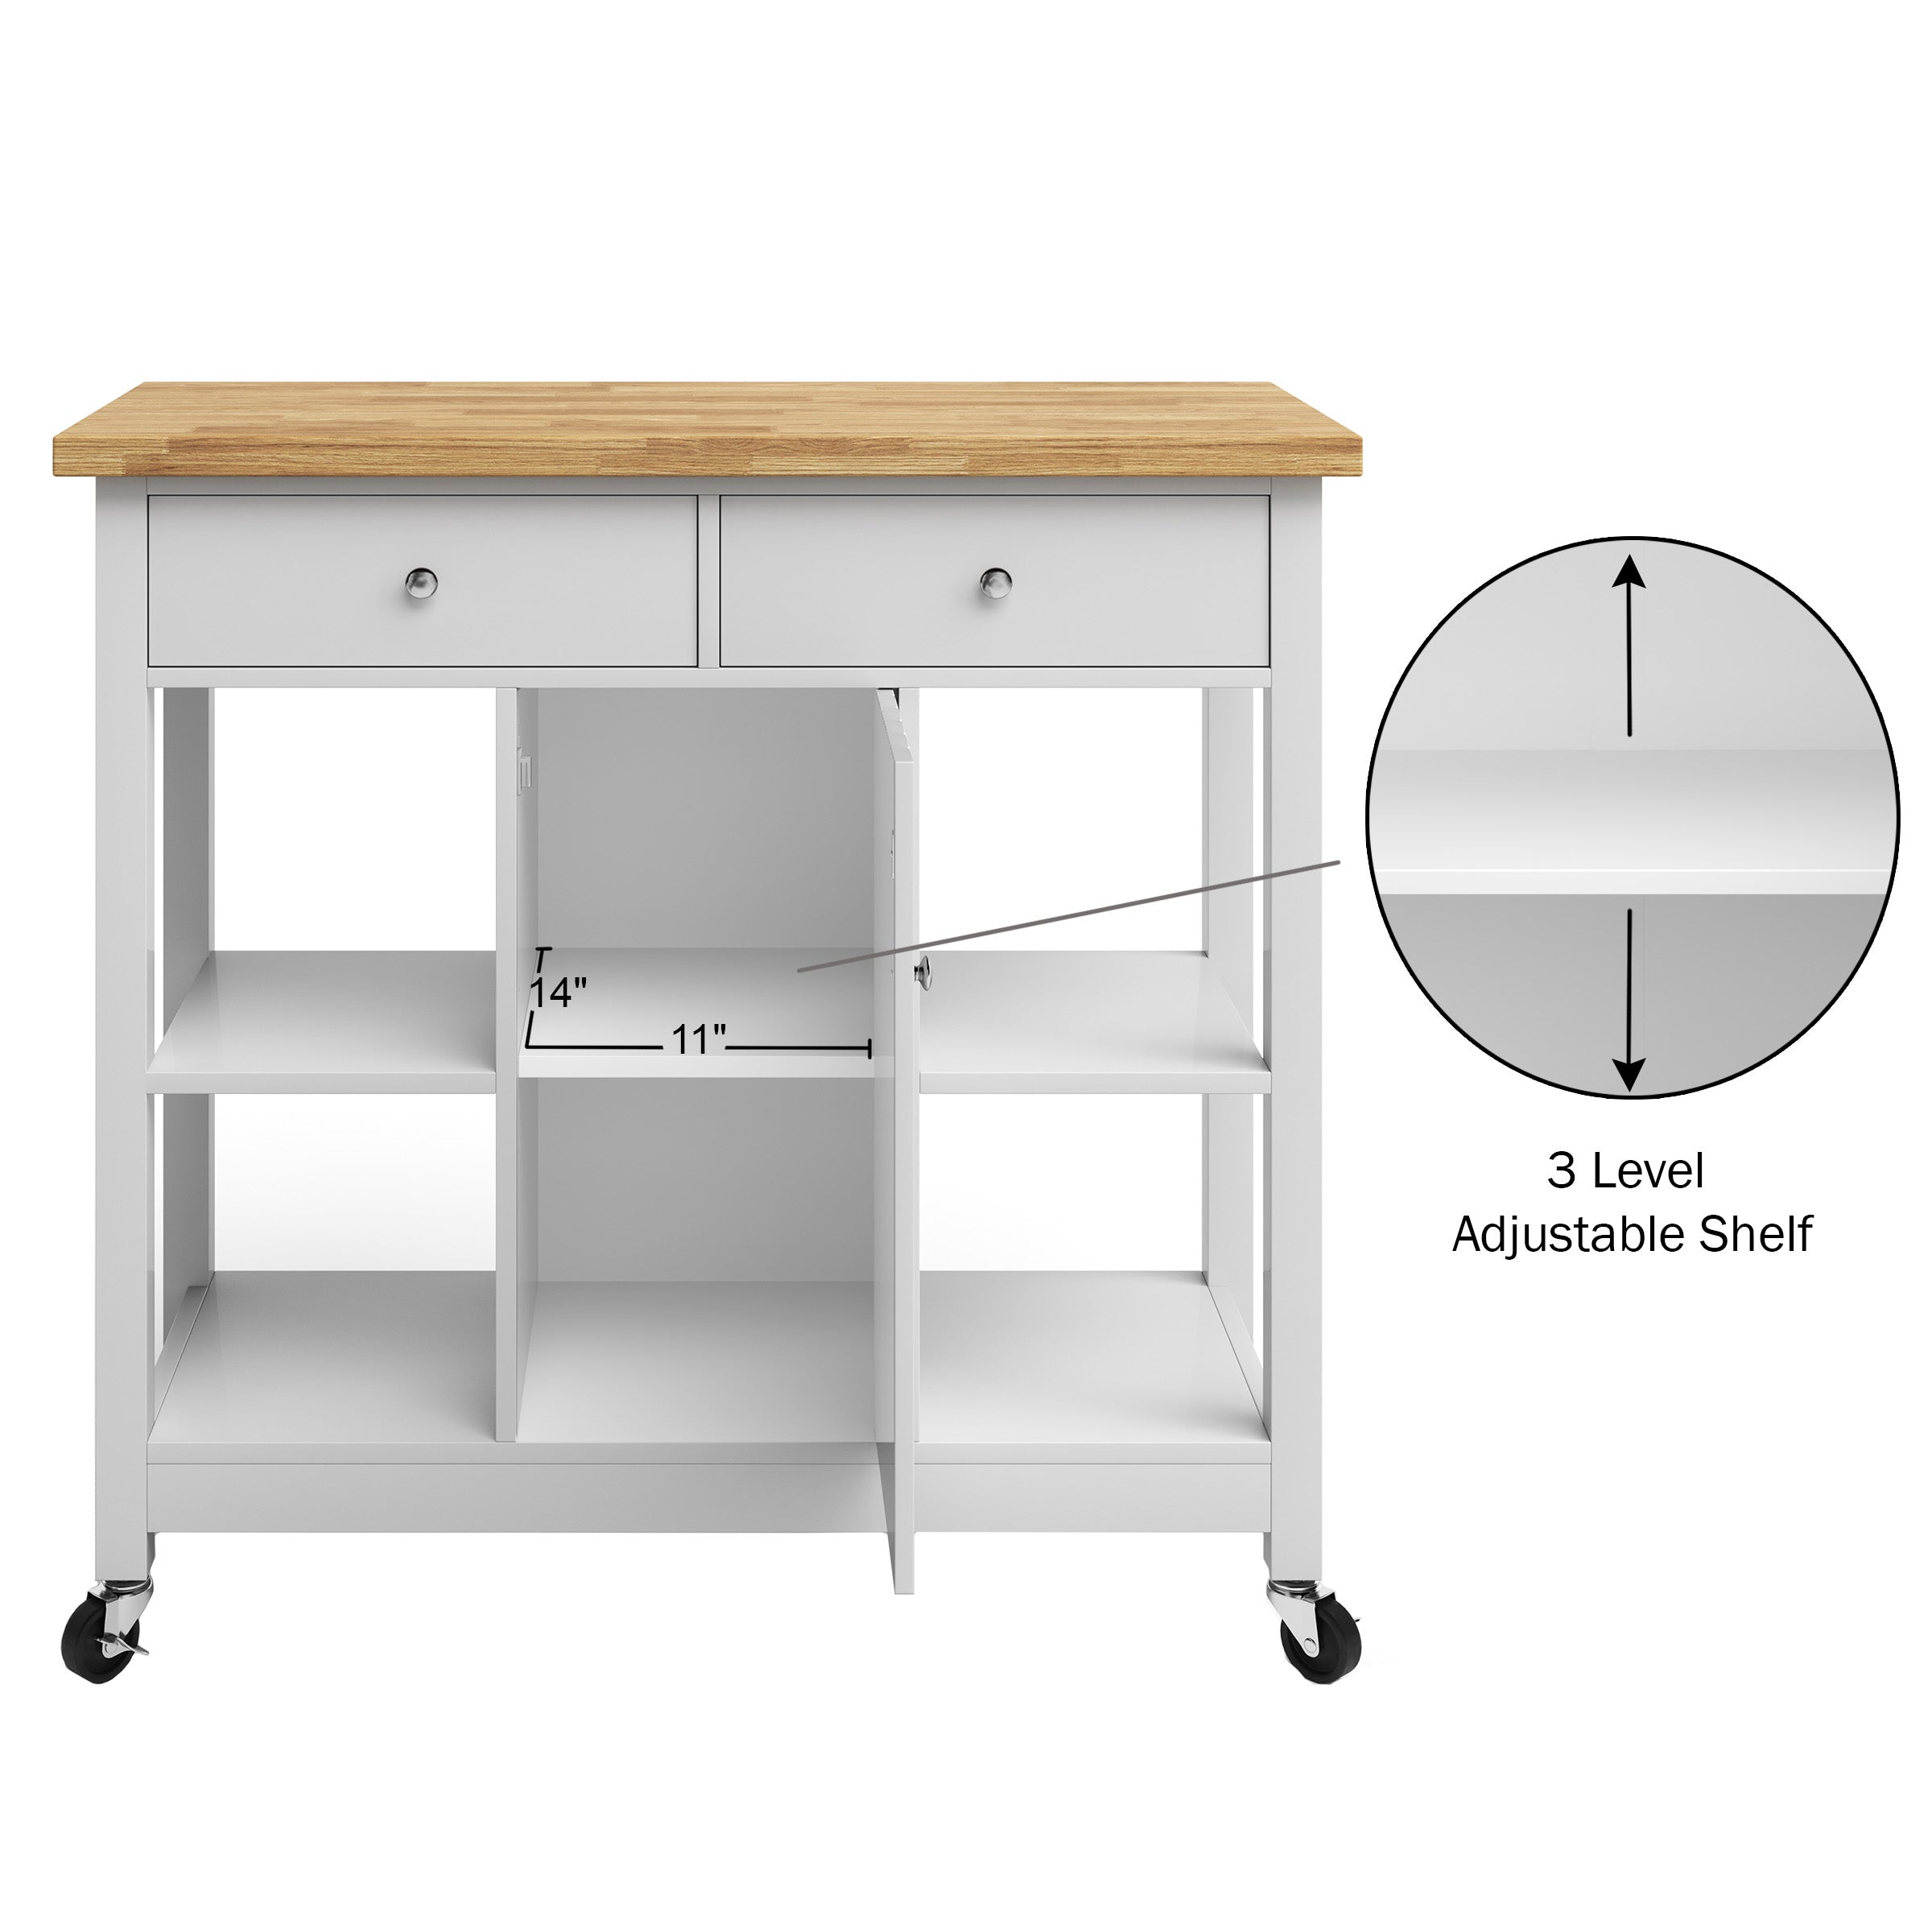 Lavish Home Kitchen Island Rolling Cart with Drawers and Casters， White